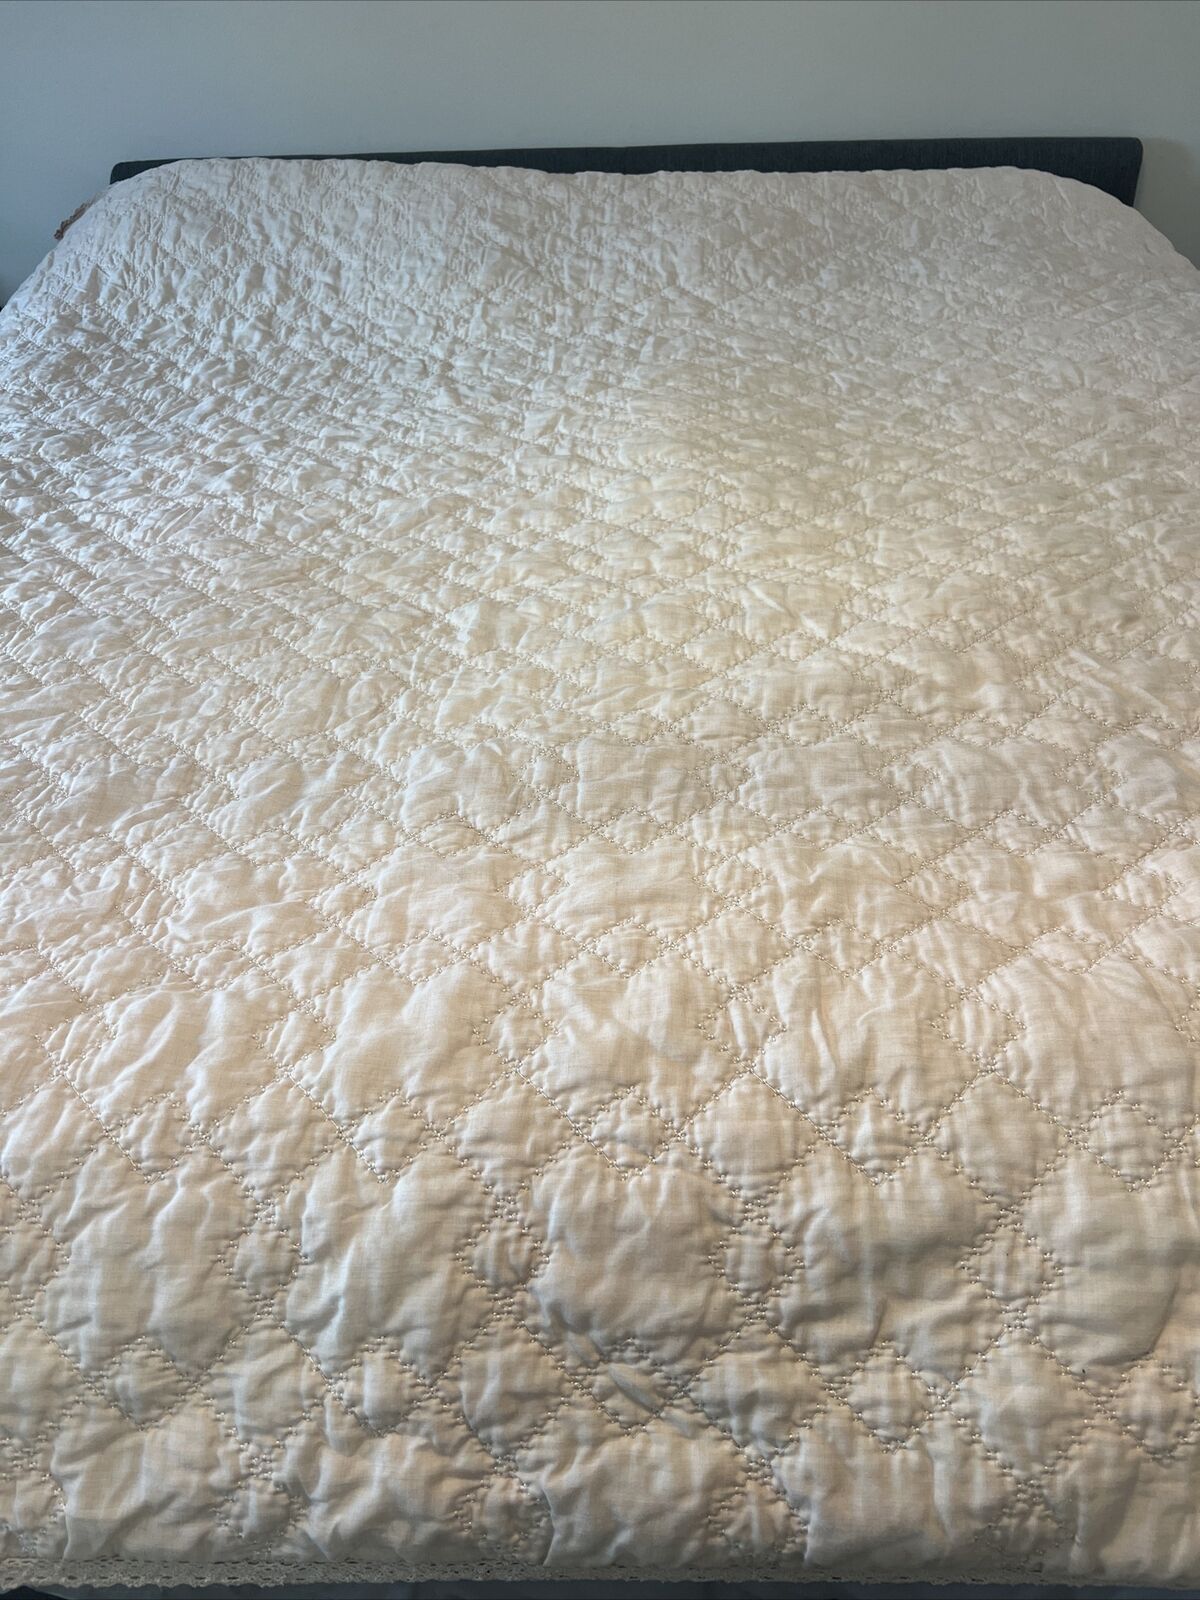 ARTISAN DE LUXE Oatmeal Tan Embroidered Edge INDIA Full Or Queen? Coverlet Quilt